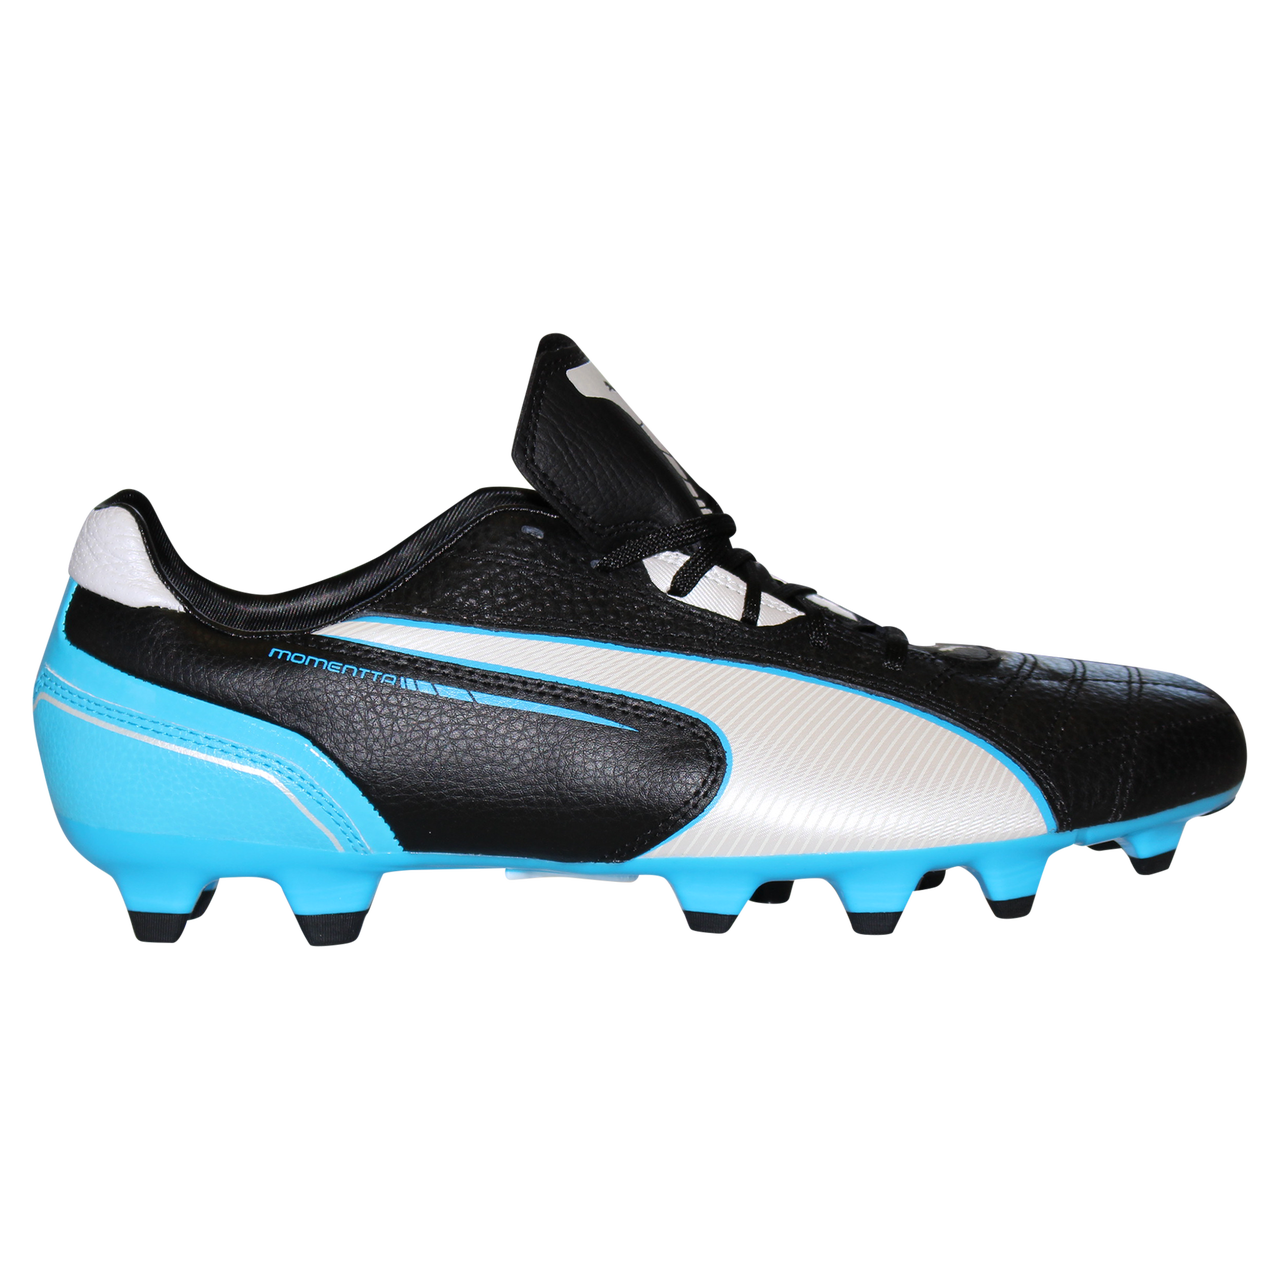 Puma Momentta Fg Black White Blue On Sale At Rugby City 69 99